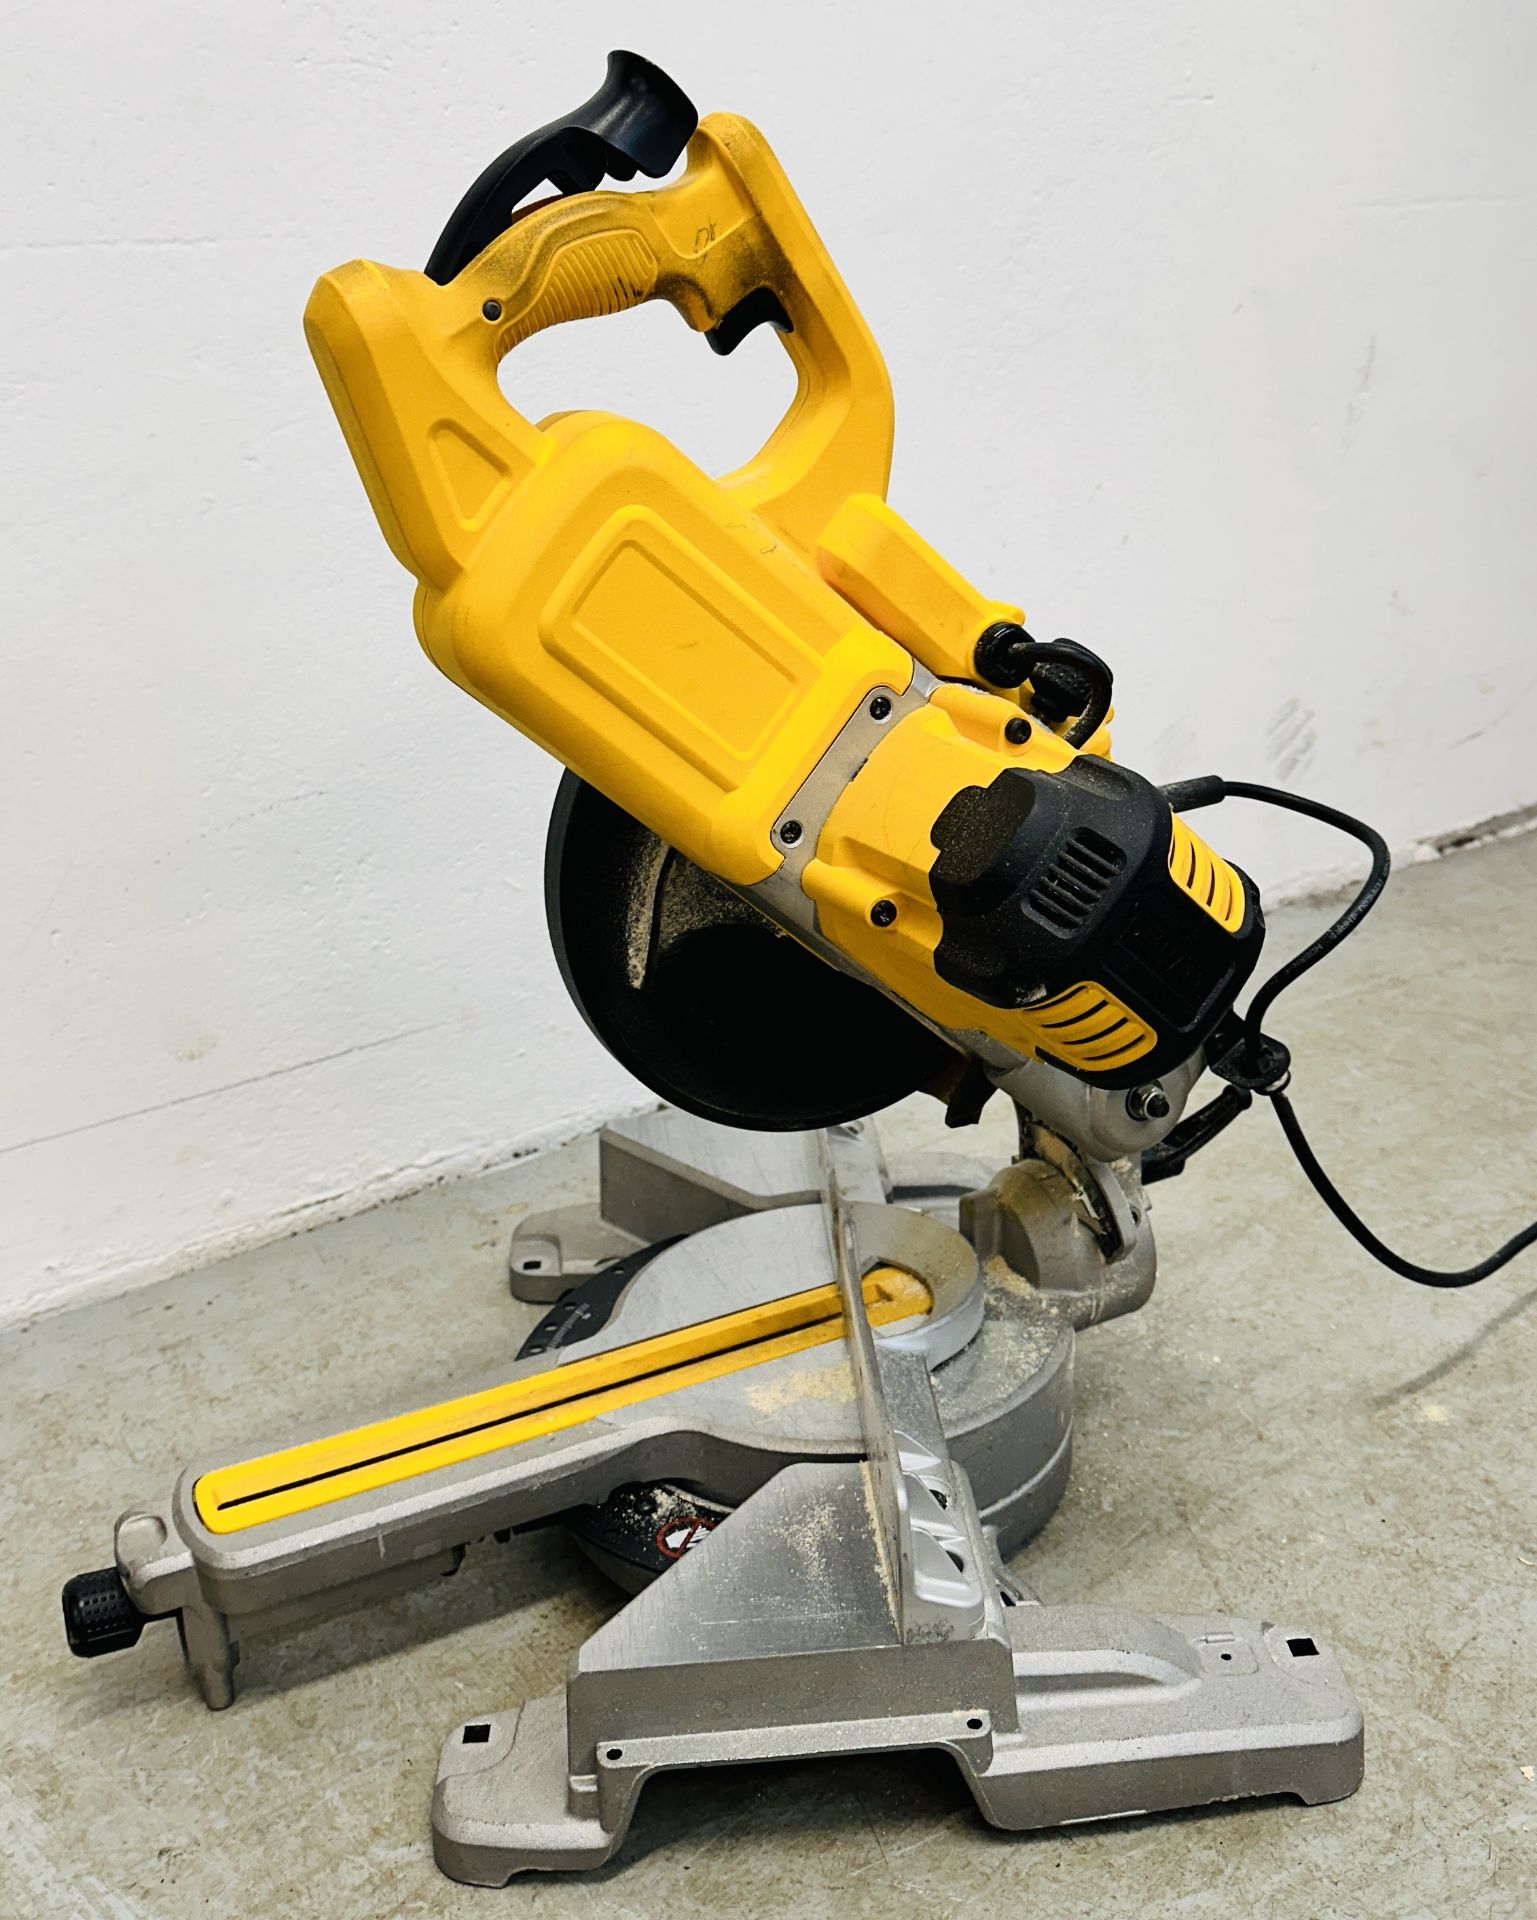 DE WALT COMPOUND MITRE SAW MODEL DWS773 - SOLD AS SEEN. THIS LOT IS SUBJECT TO VAT ON HAMMER PRICE. - Image 4 of 5